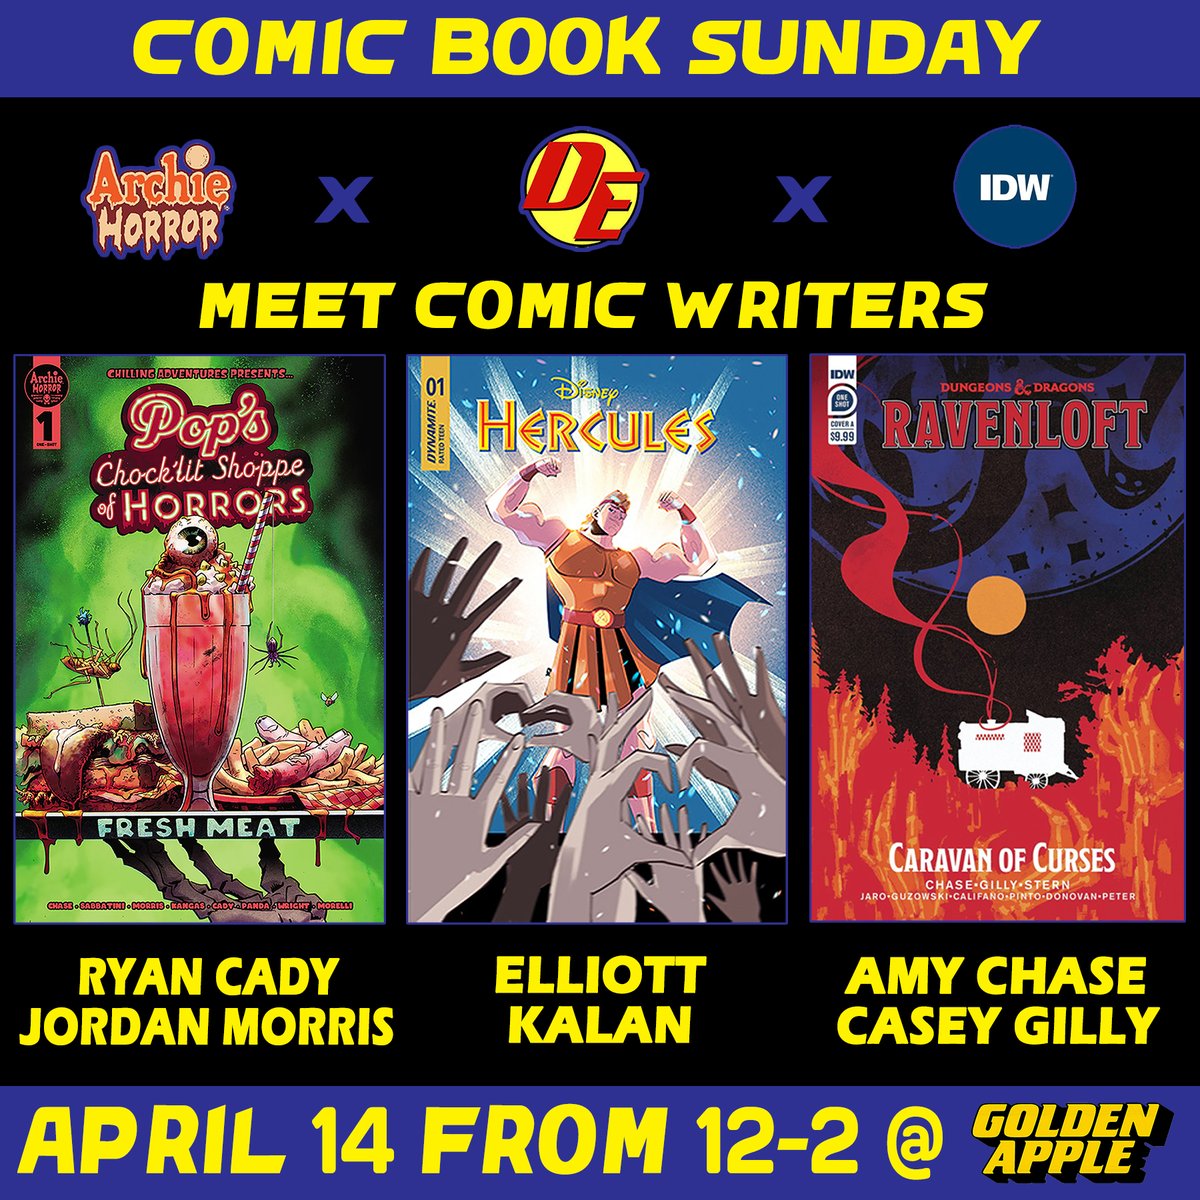 Not only is HERCULES #1 out today, but I'll be signing it IN PERSON this Sunday at @GAppleComics!